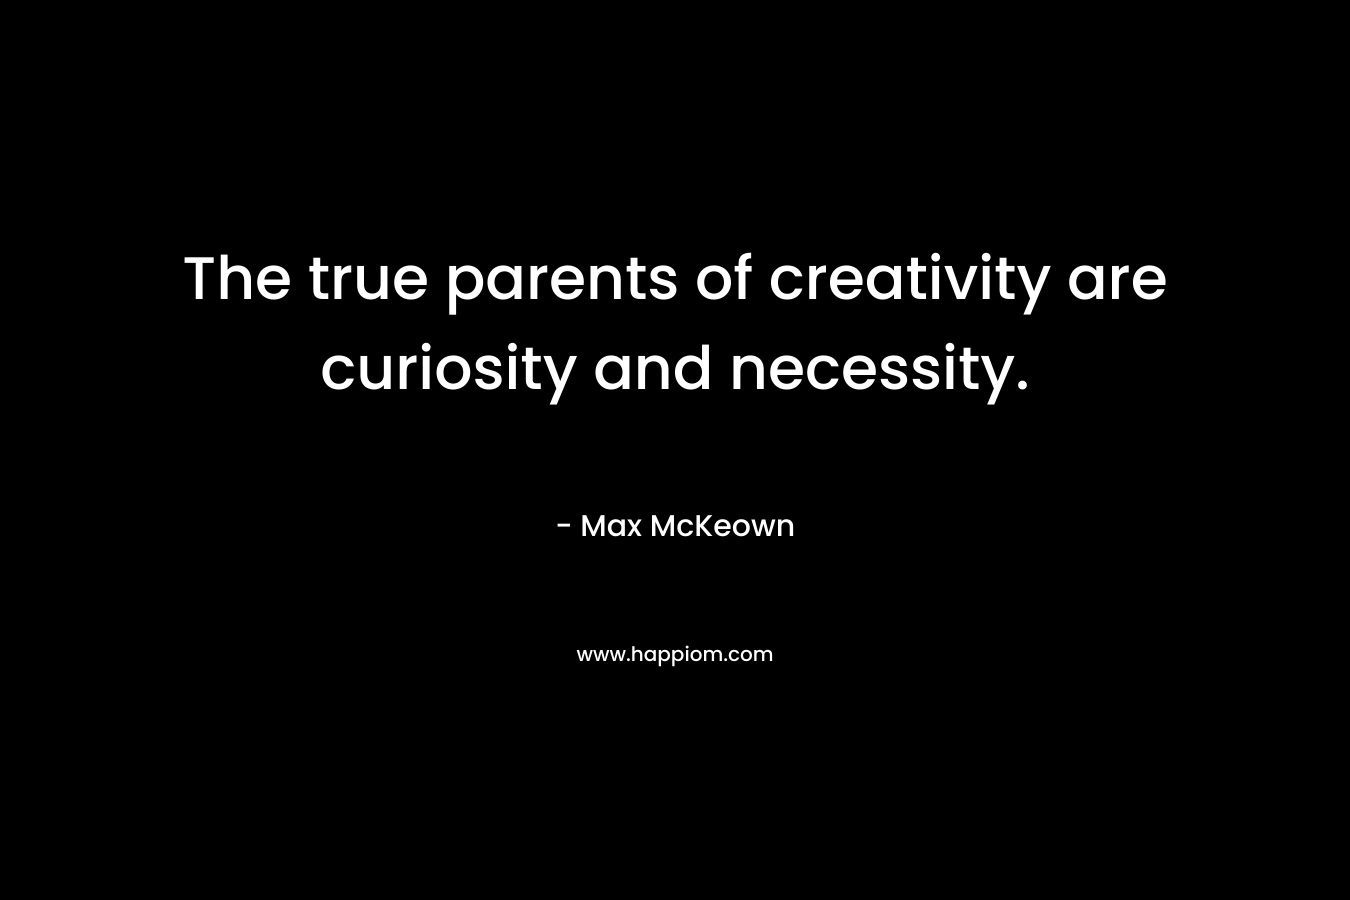 The true parents of creativity are curiosity and necessity.